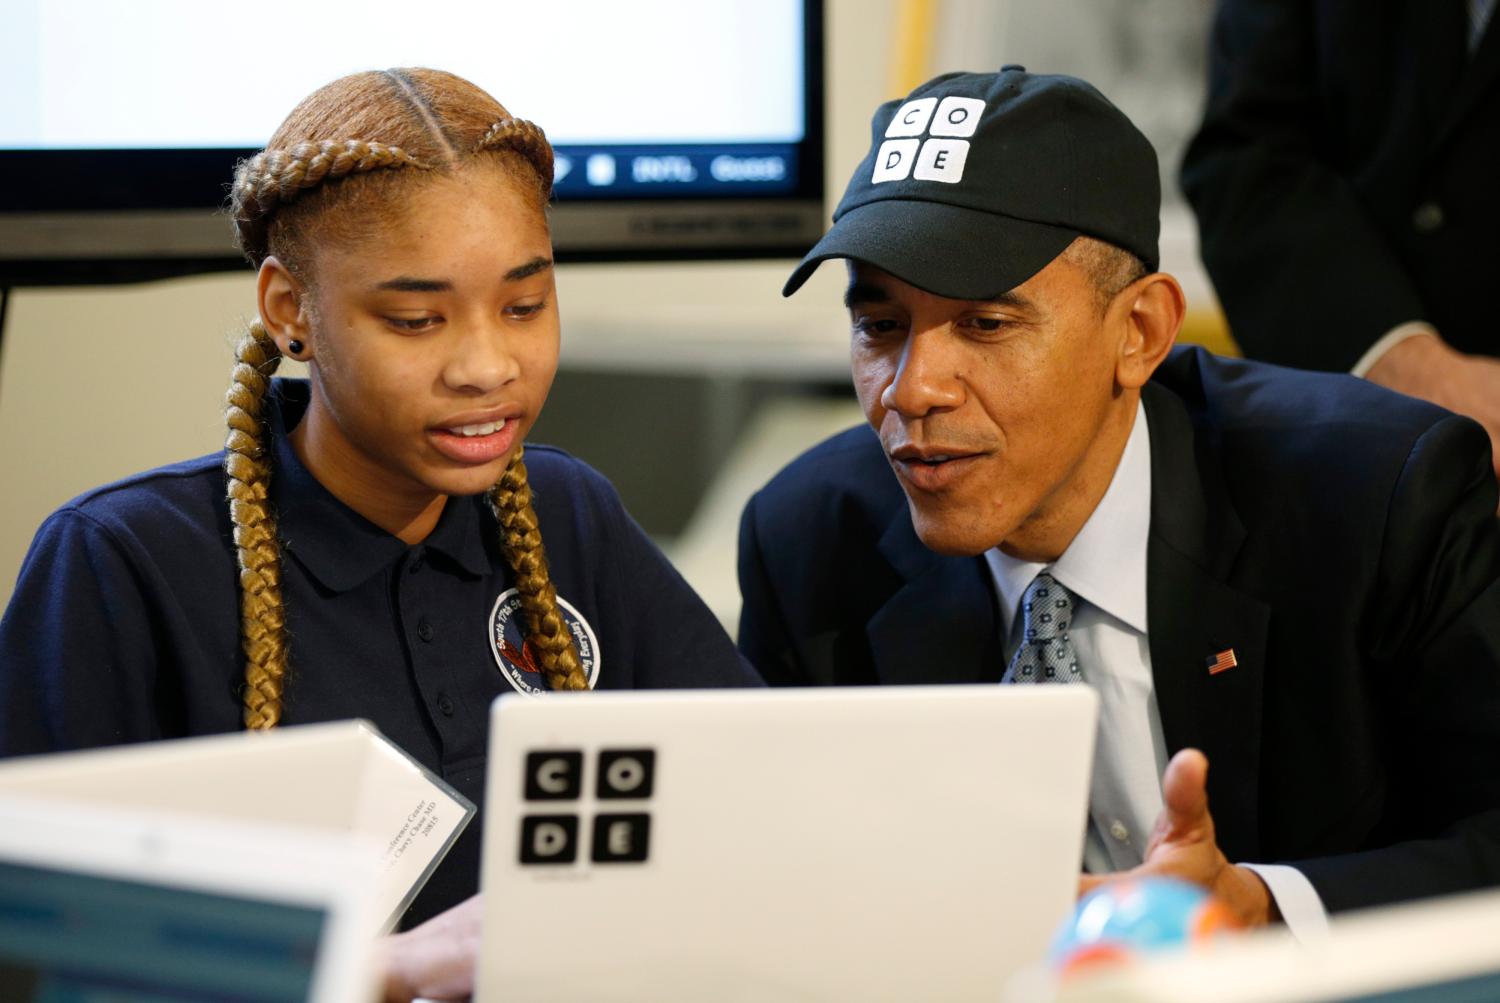 U.S. President Barack Obama talks with Adrianna Mitchell a student from Newark, New Jersey, taking part in an "Hour of Code"? event at the White House in Washington December 8, 2014.